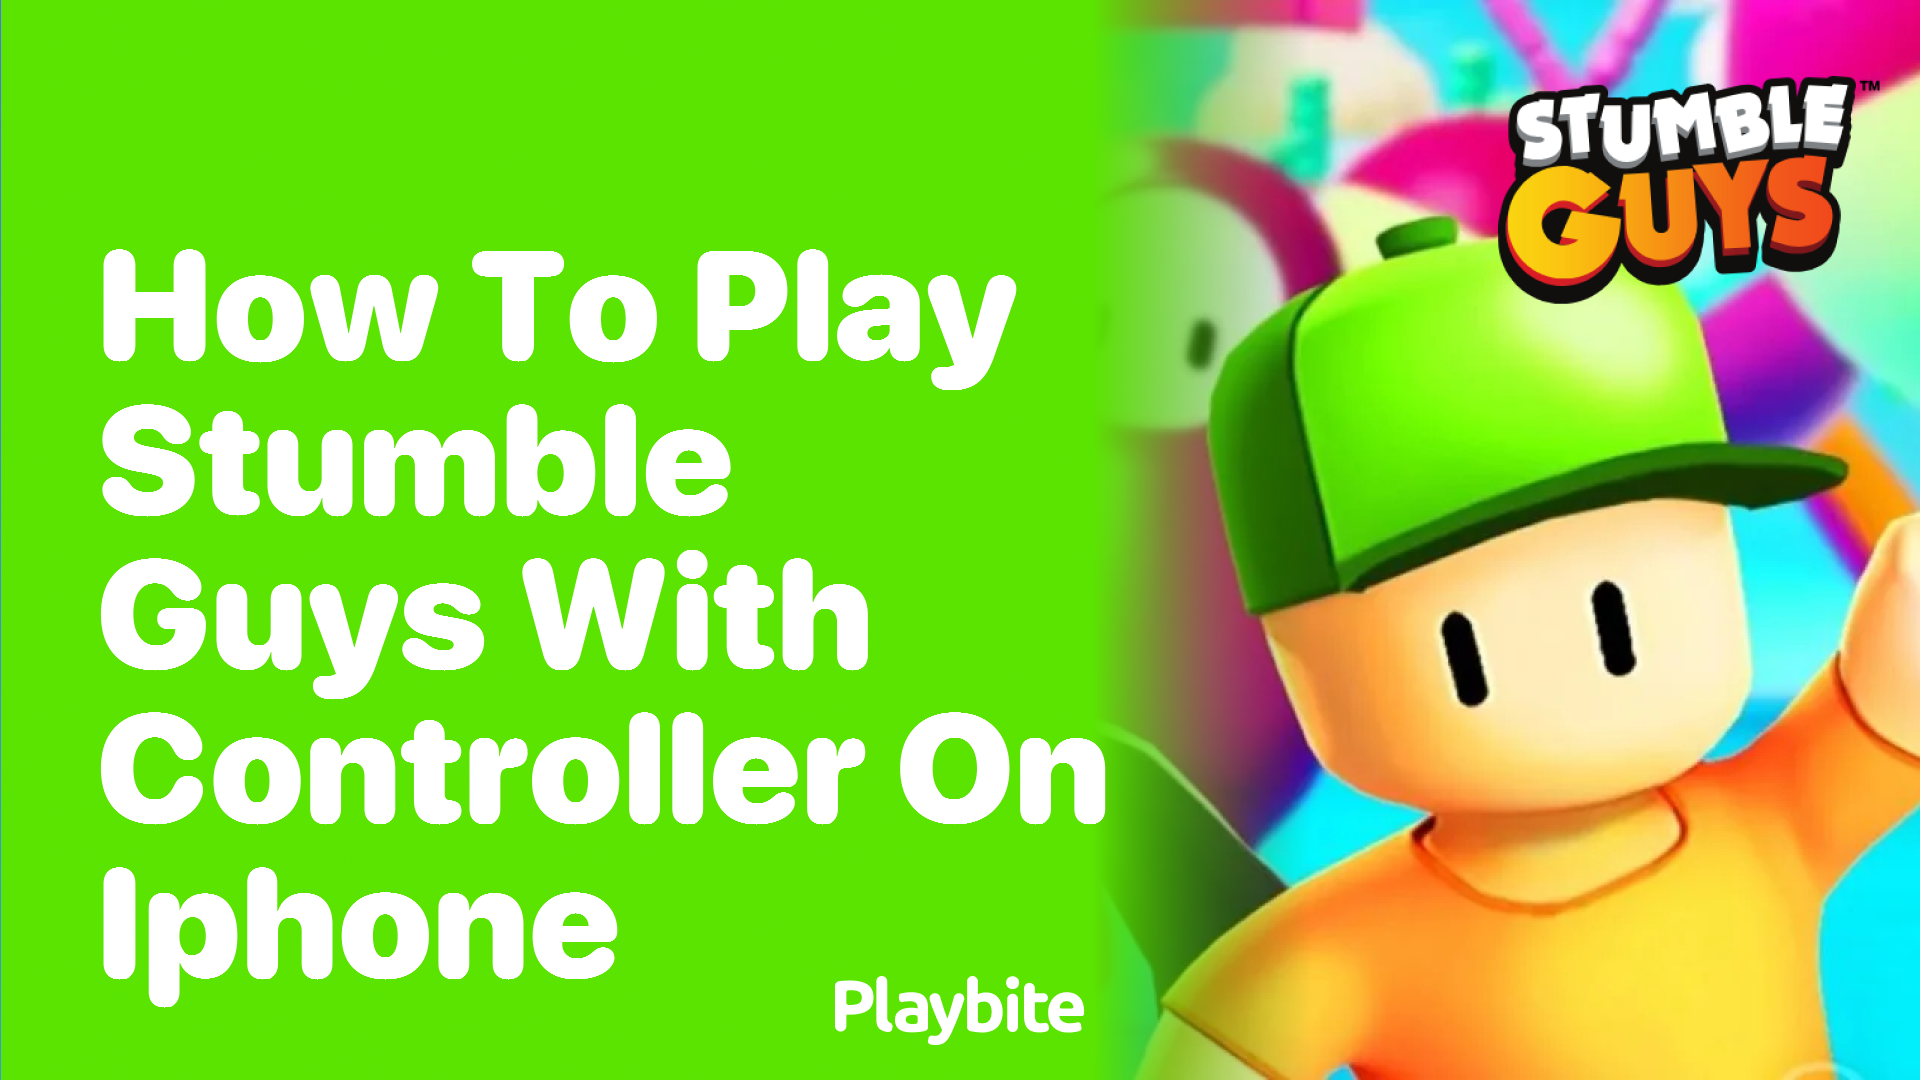 How to Play Stumble Guys with a Controller on iPhone